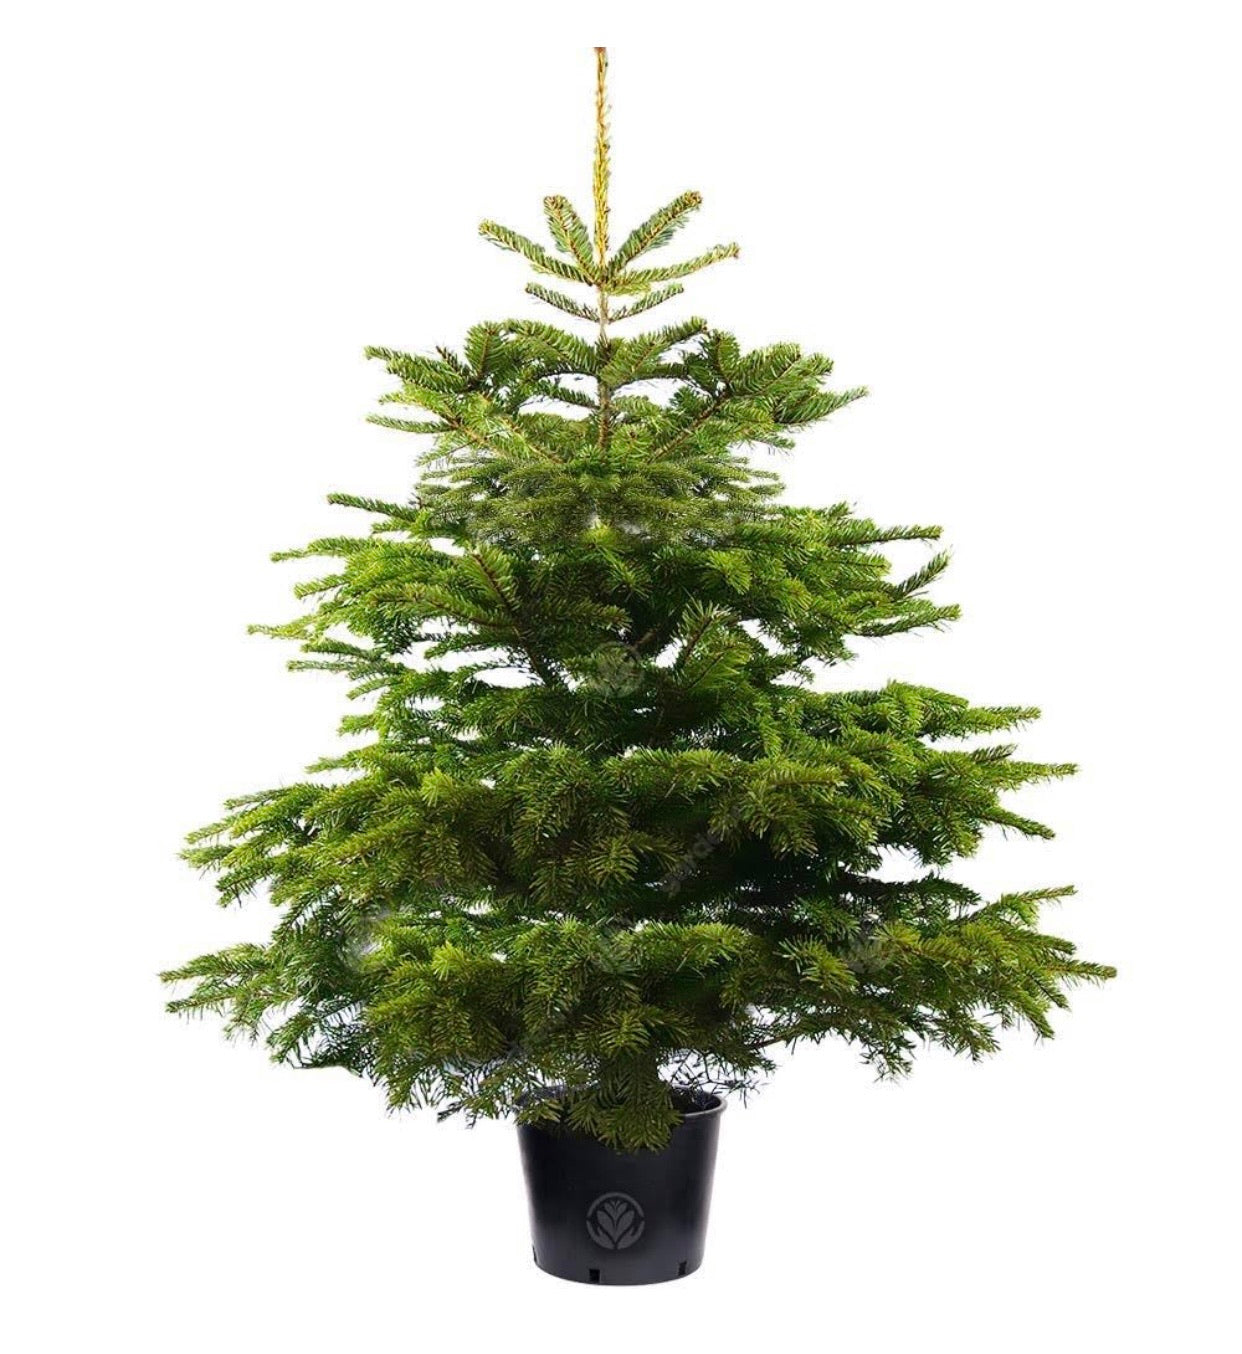 3FT Potted Nordmann Fir Christmas Tree with 50 Battery Lights